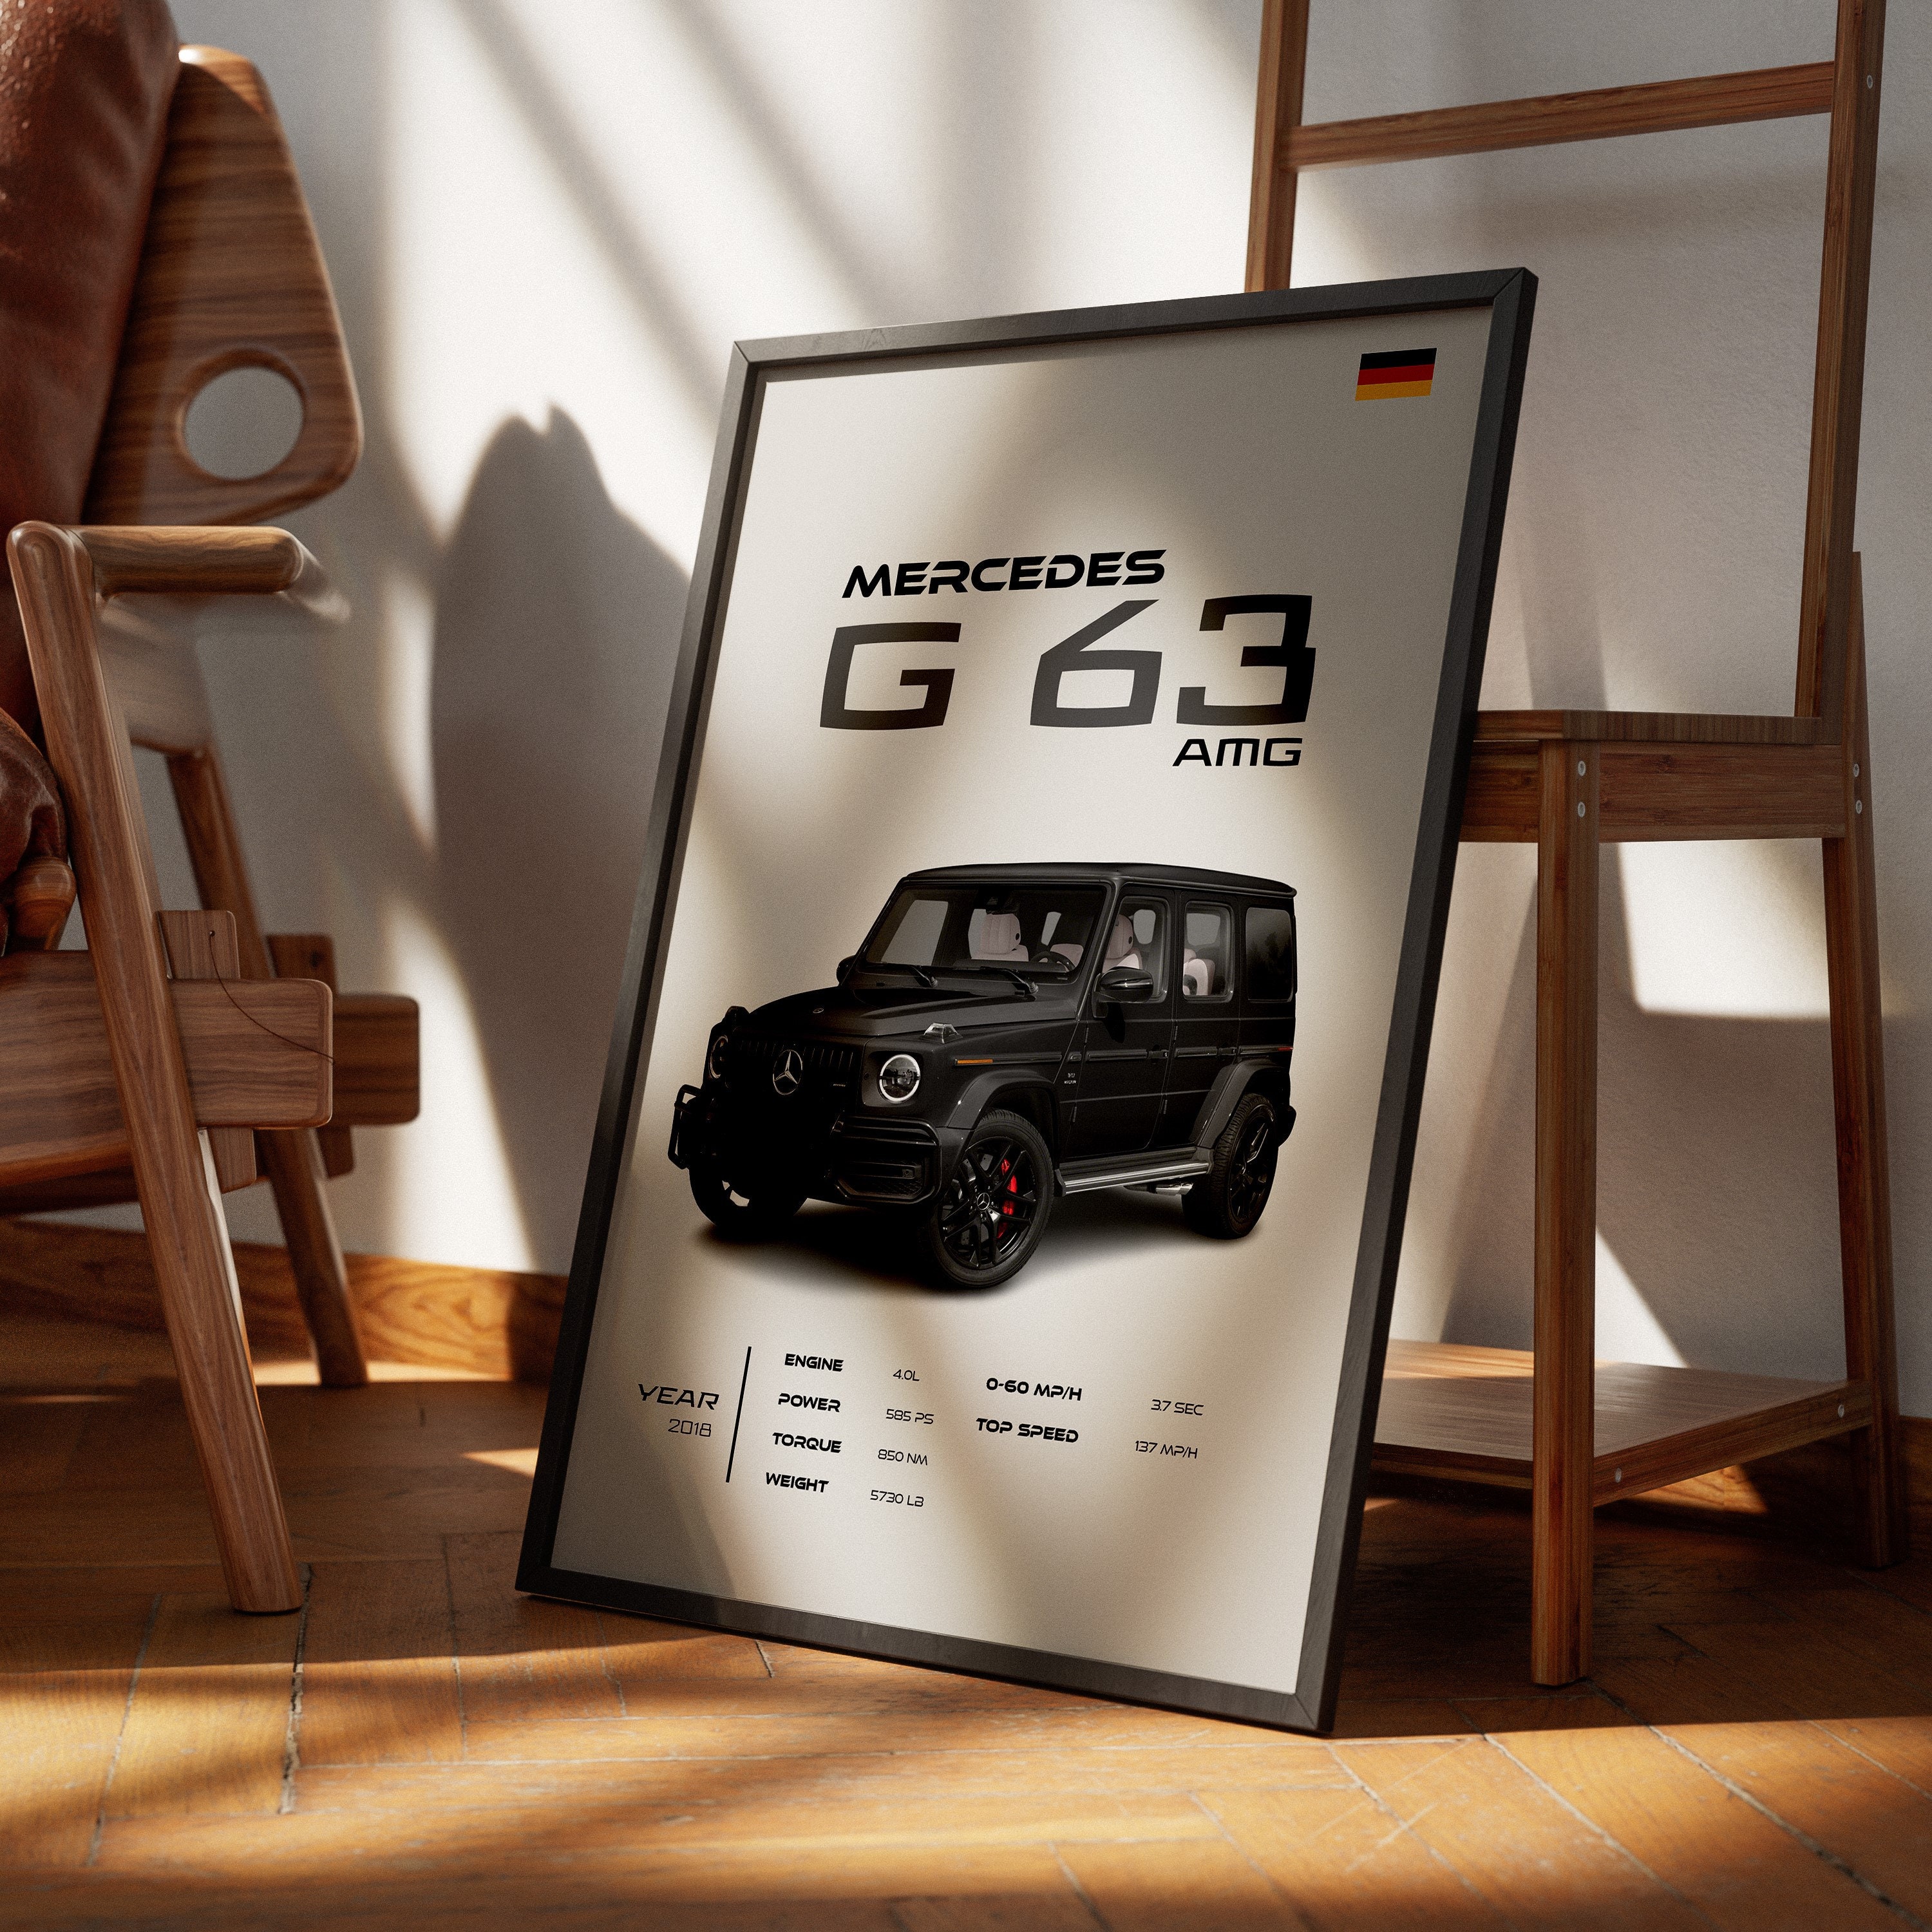 G class gold sketch - Off Road King Mercedes G - Posters and Art Prints